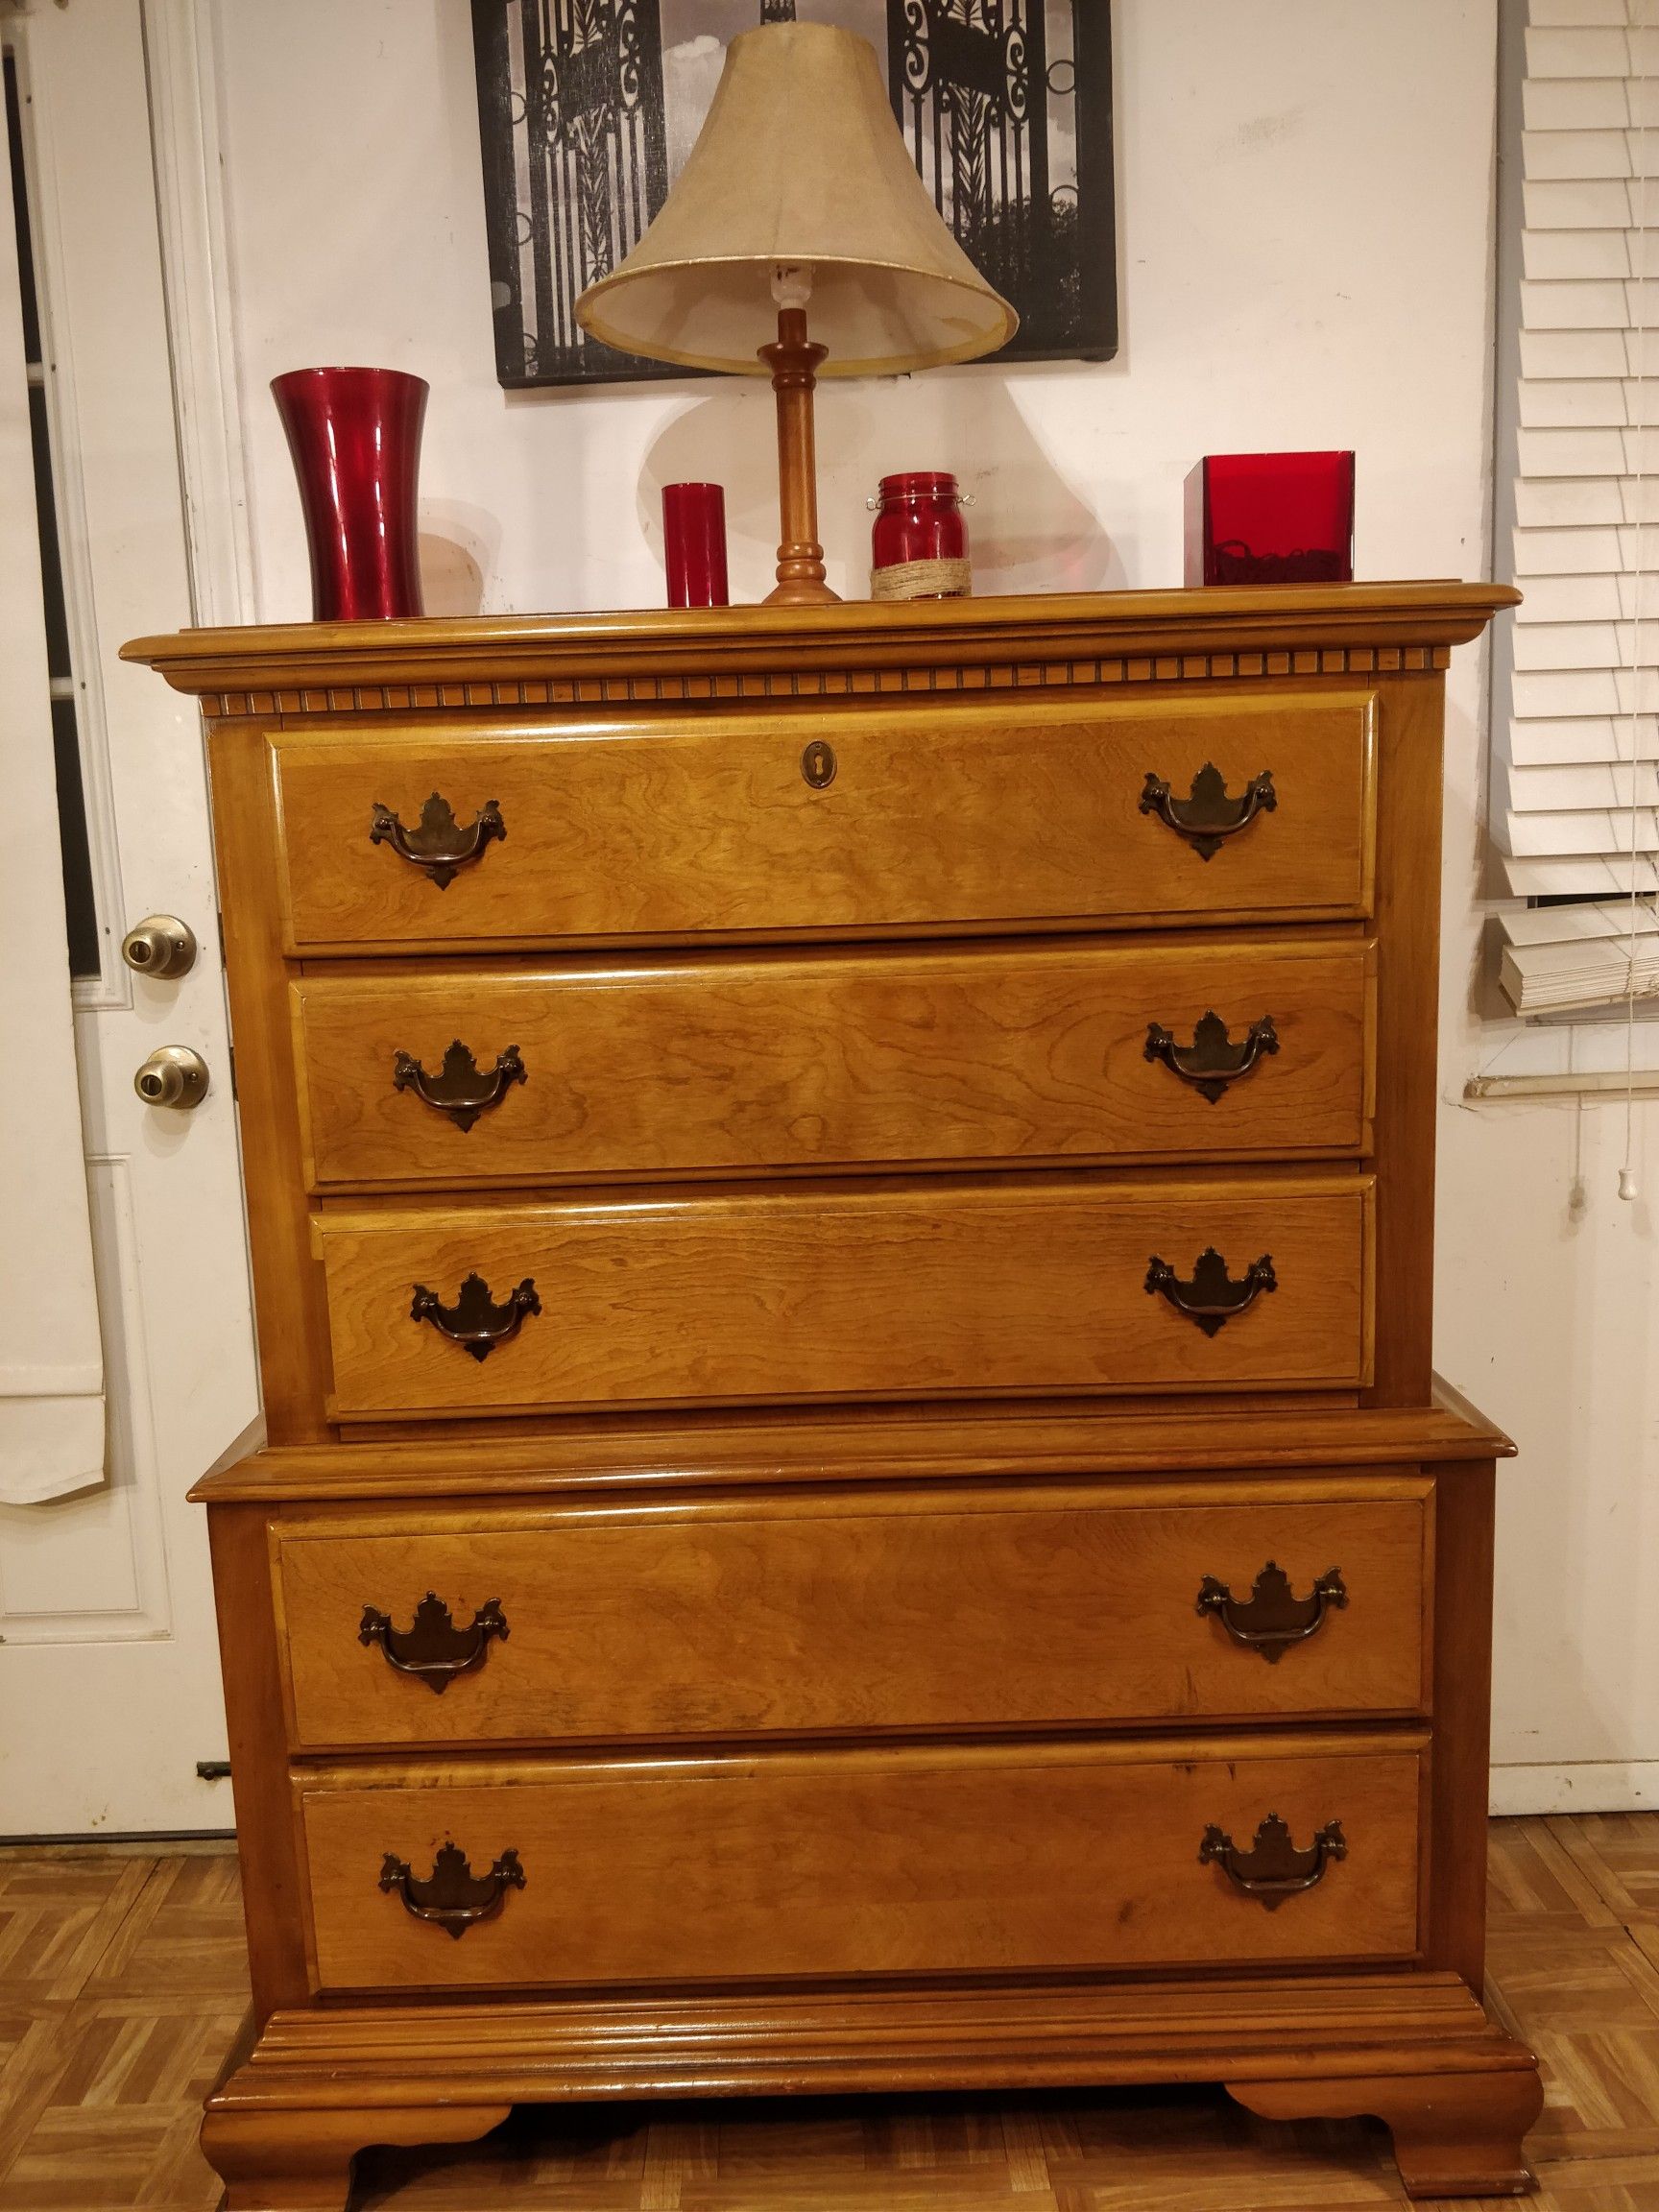 Solid wood tall boy/chest dresser with big drawers in great condition, all drawers working well, dovetail drawers. L42"*W19.5"*H50"